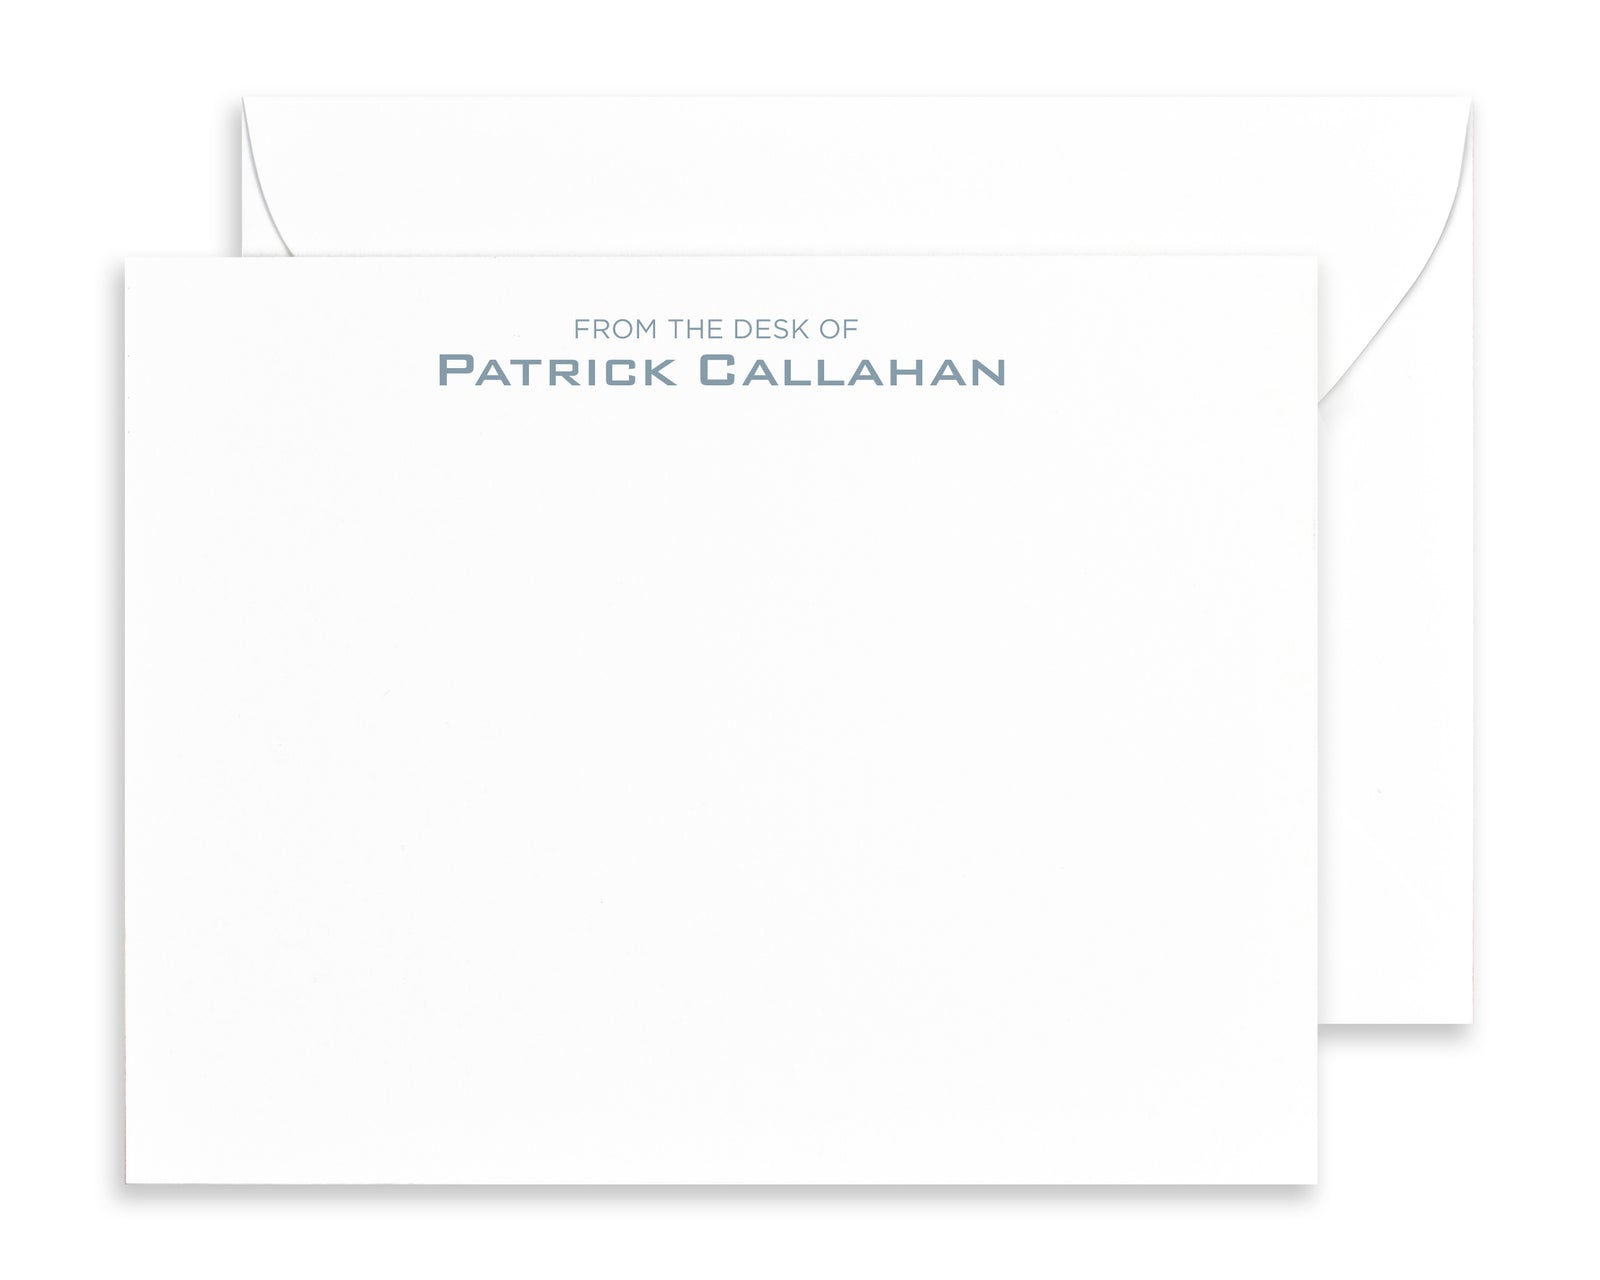  Personalized Stationary Note Cards and Envelopes for